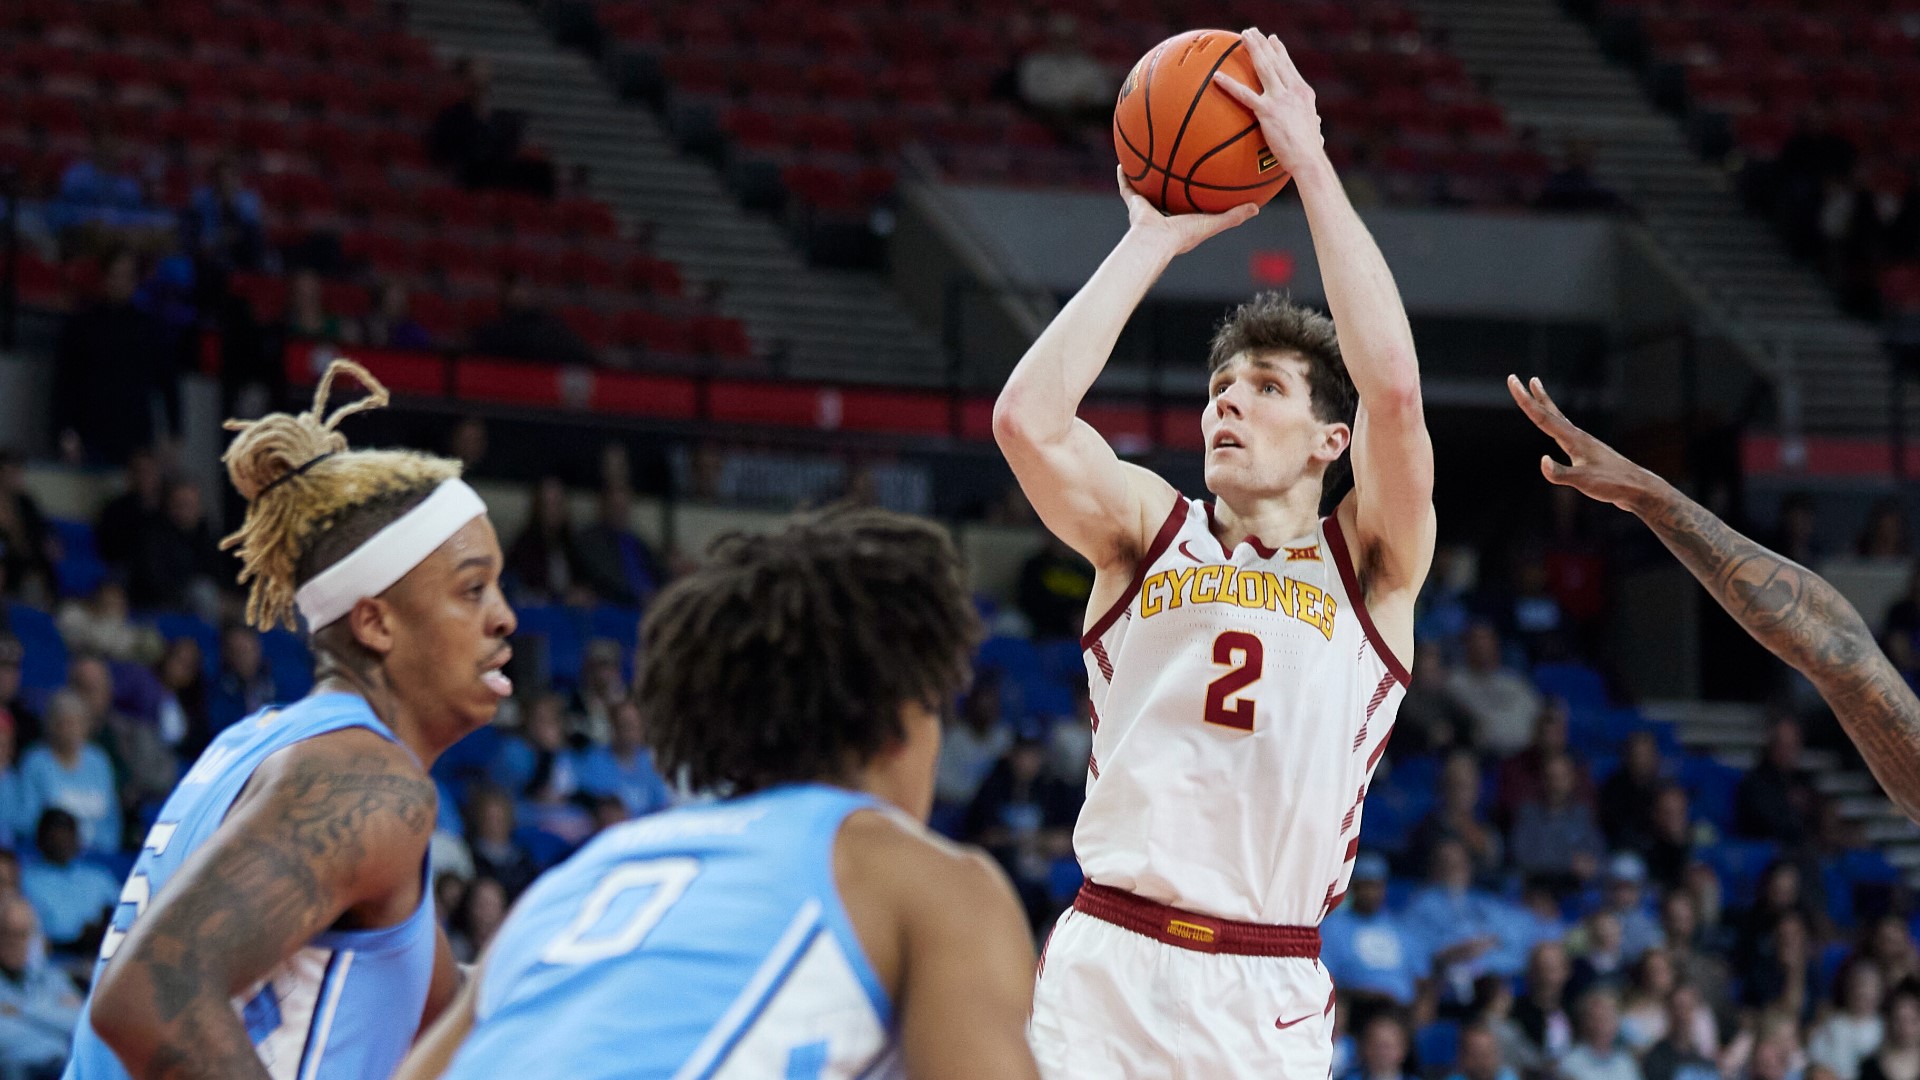 The senior guard is no longer a Cyclone "due to a failure to meet the program’s expectations," the school said in a release.